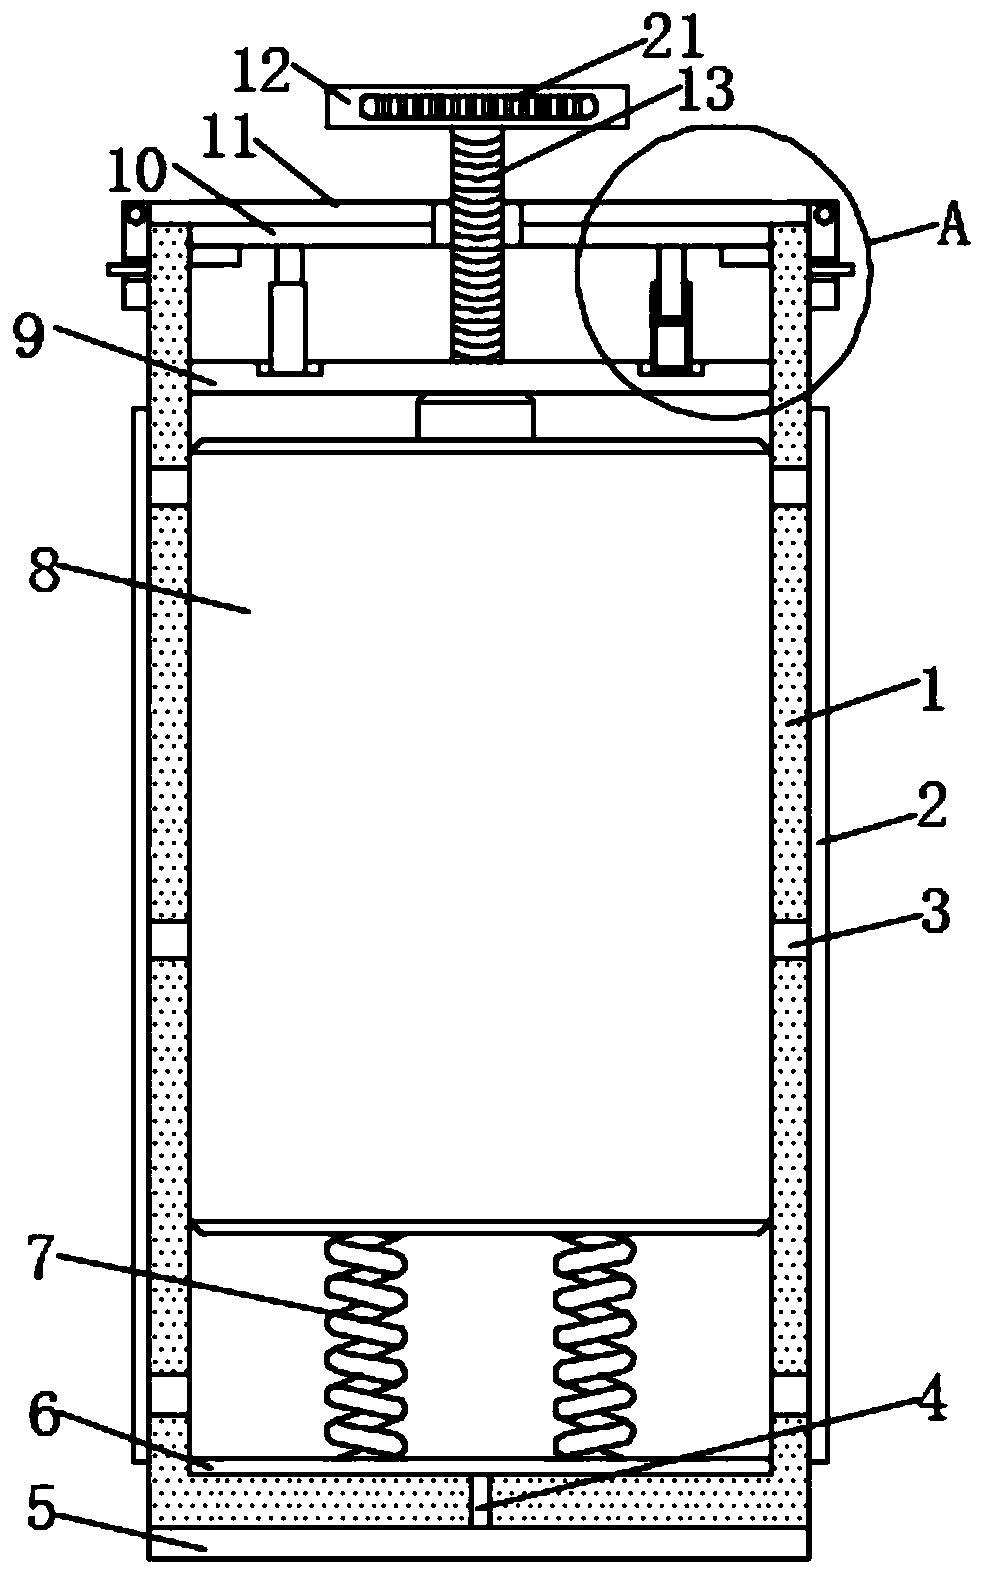 Battery device for downhole storage pressure gage